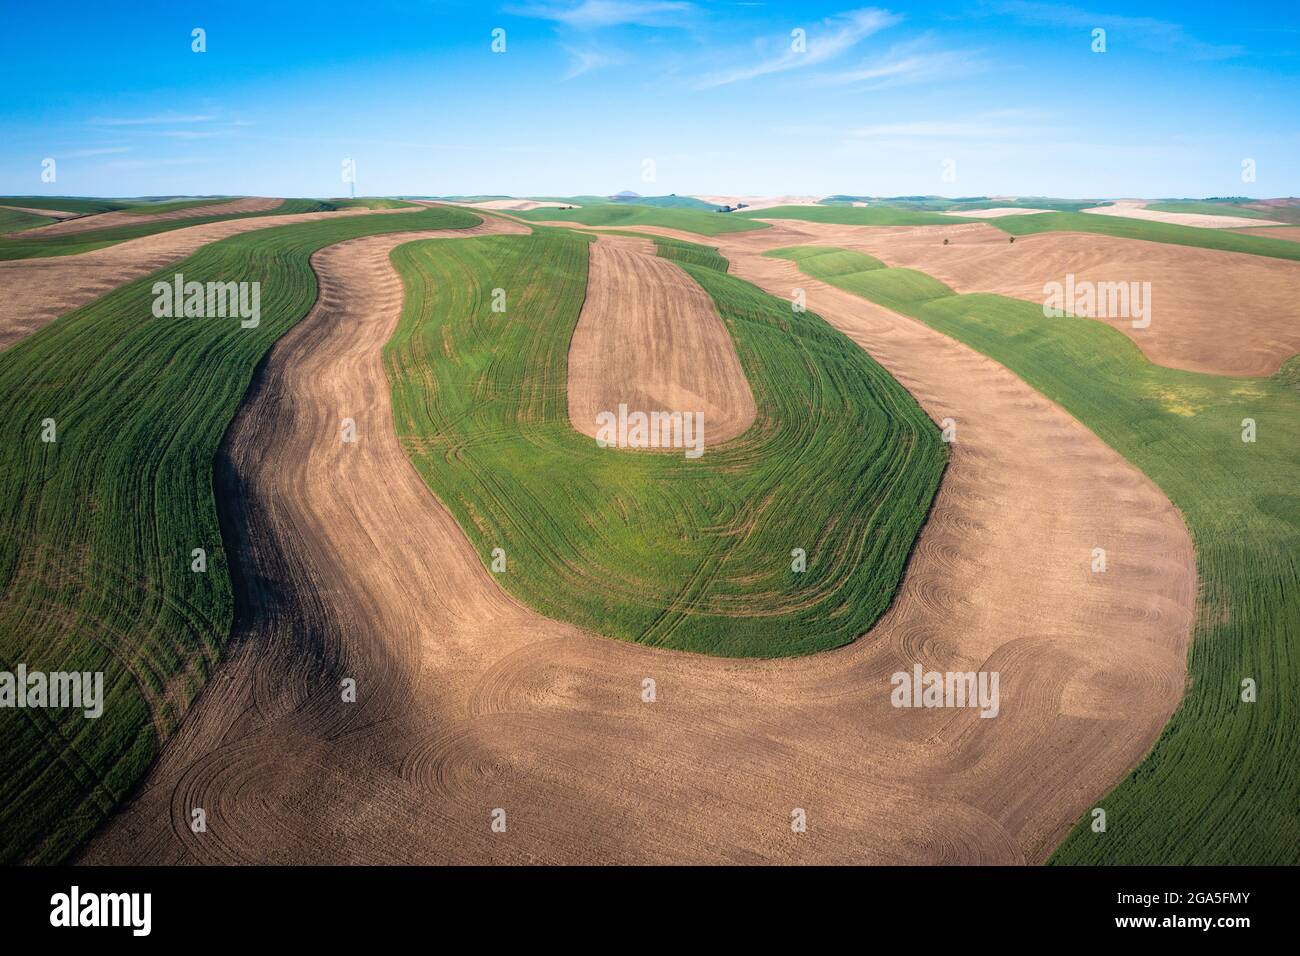 Plowed fields in the Palouse area of eastern Washington state. Stock Photo